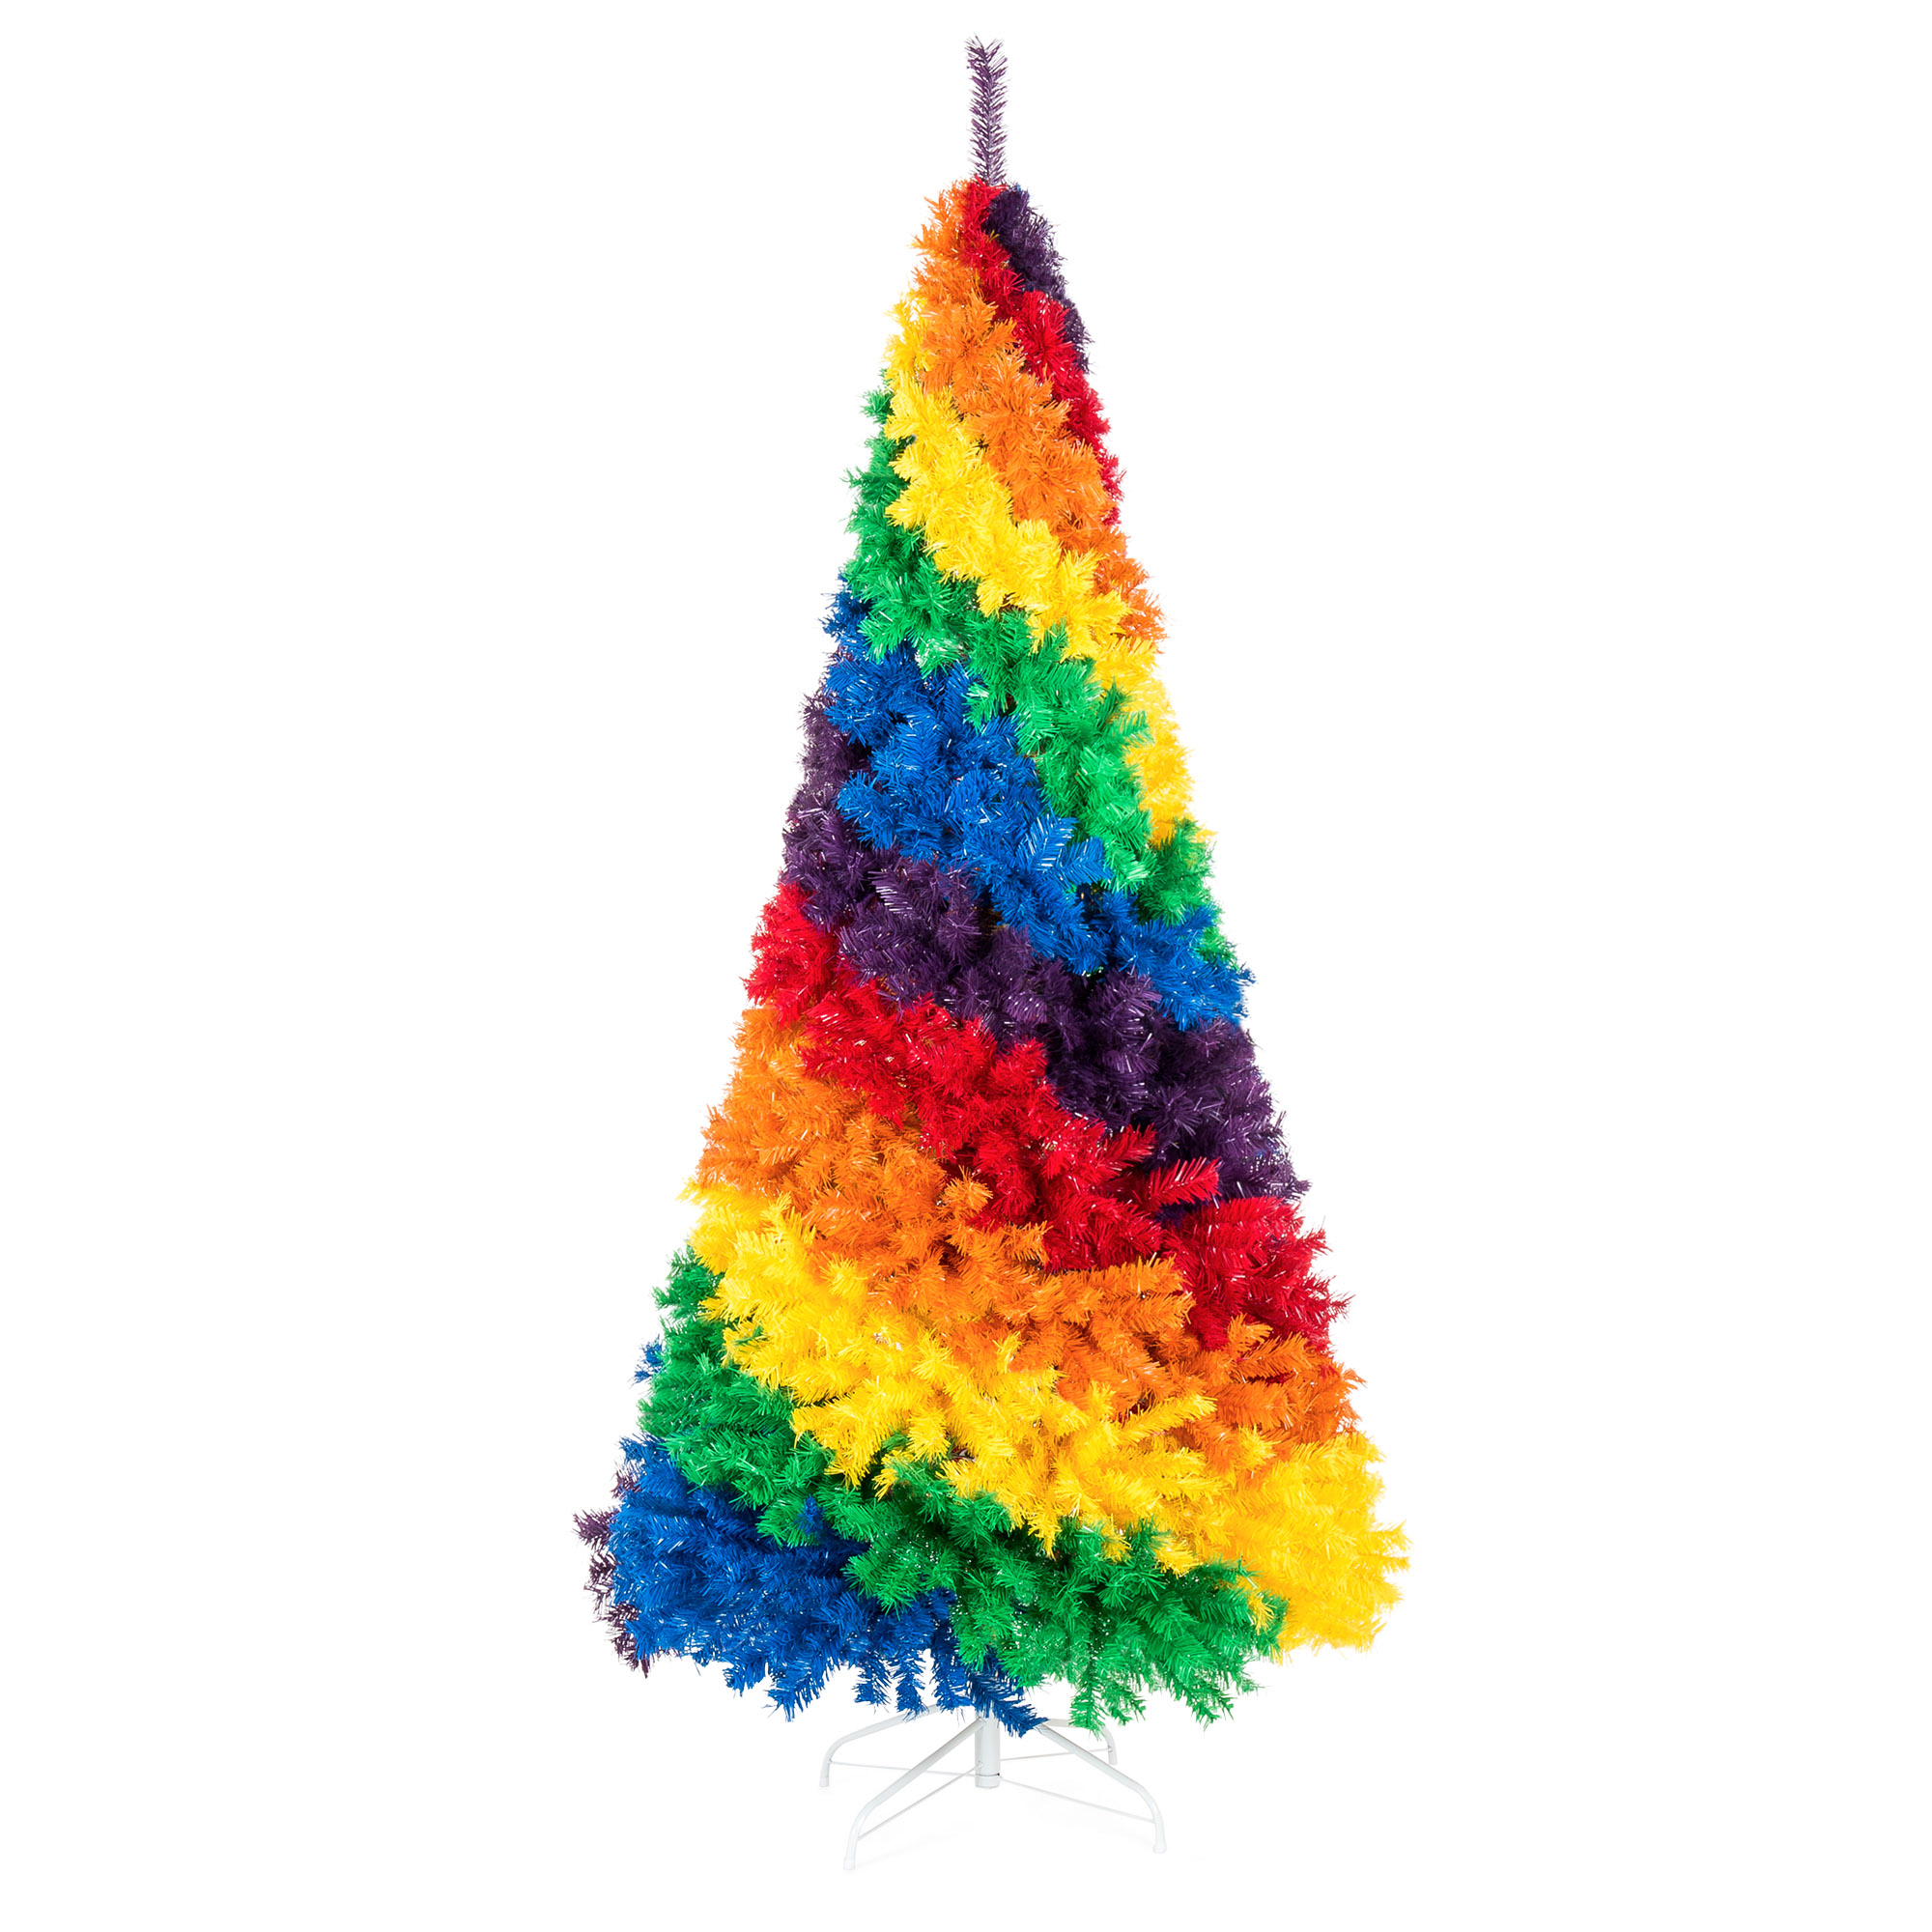 Best Choice Products 7ft Artificial Colorful Rainbow Christmas Tree, Full Fir Holiday Decor w/ 1,213 Tips, Metal Stand - image 1 of 8